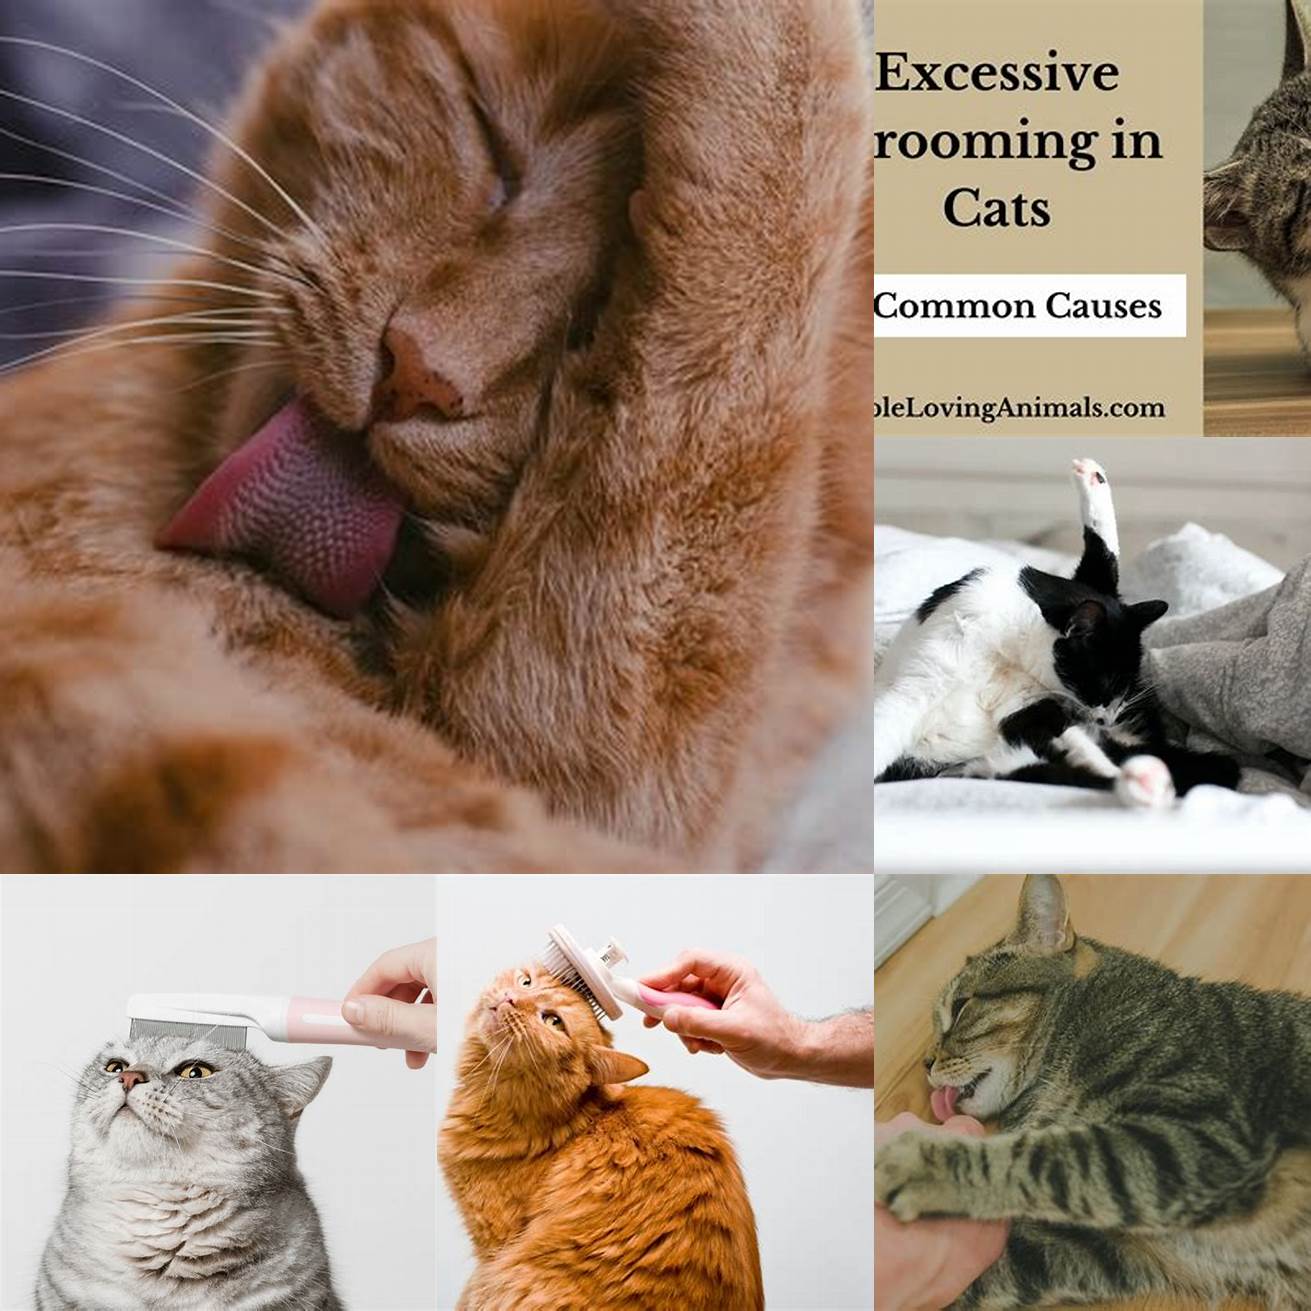 Cat grooming excessively